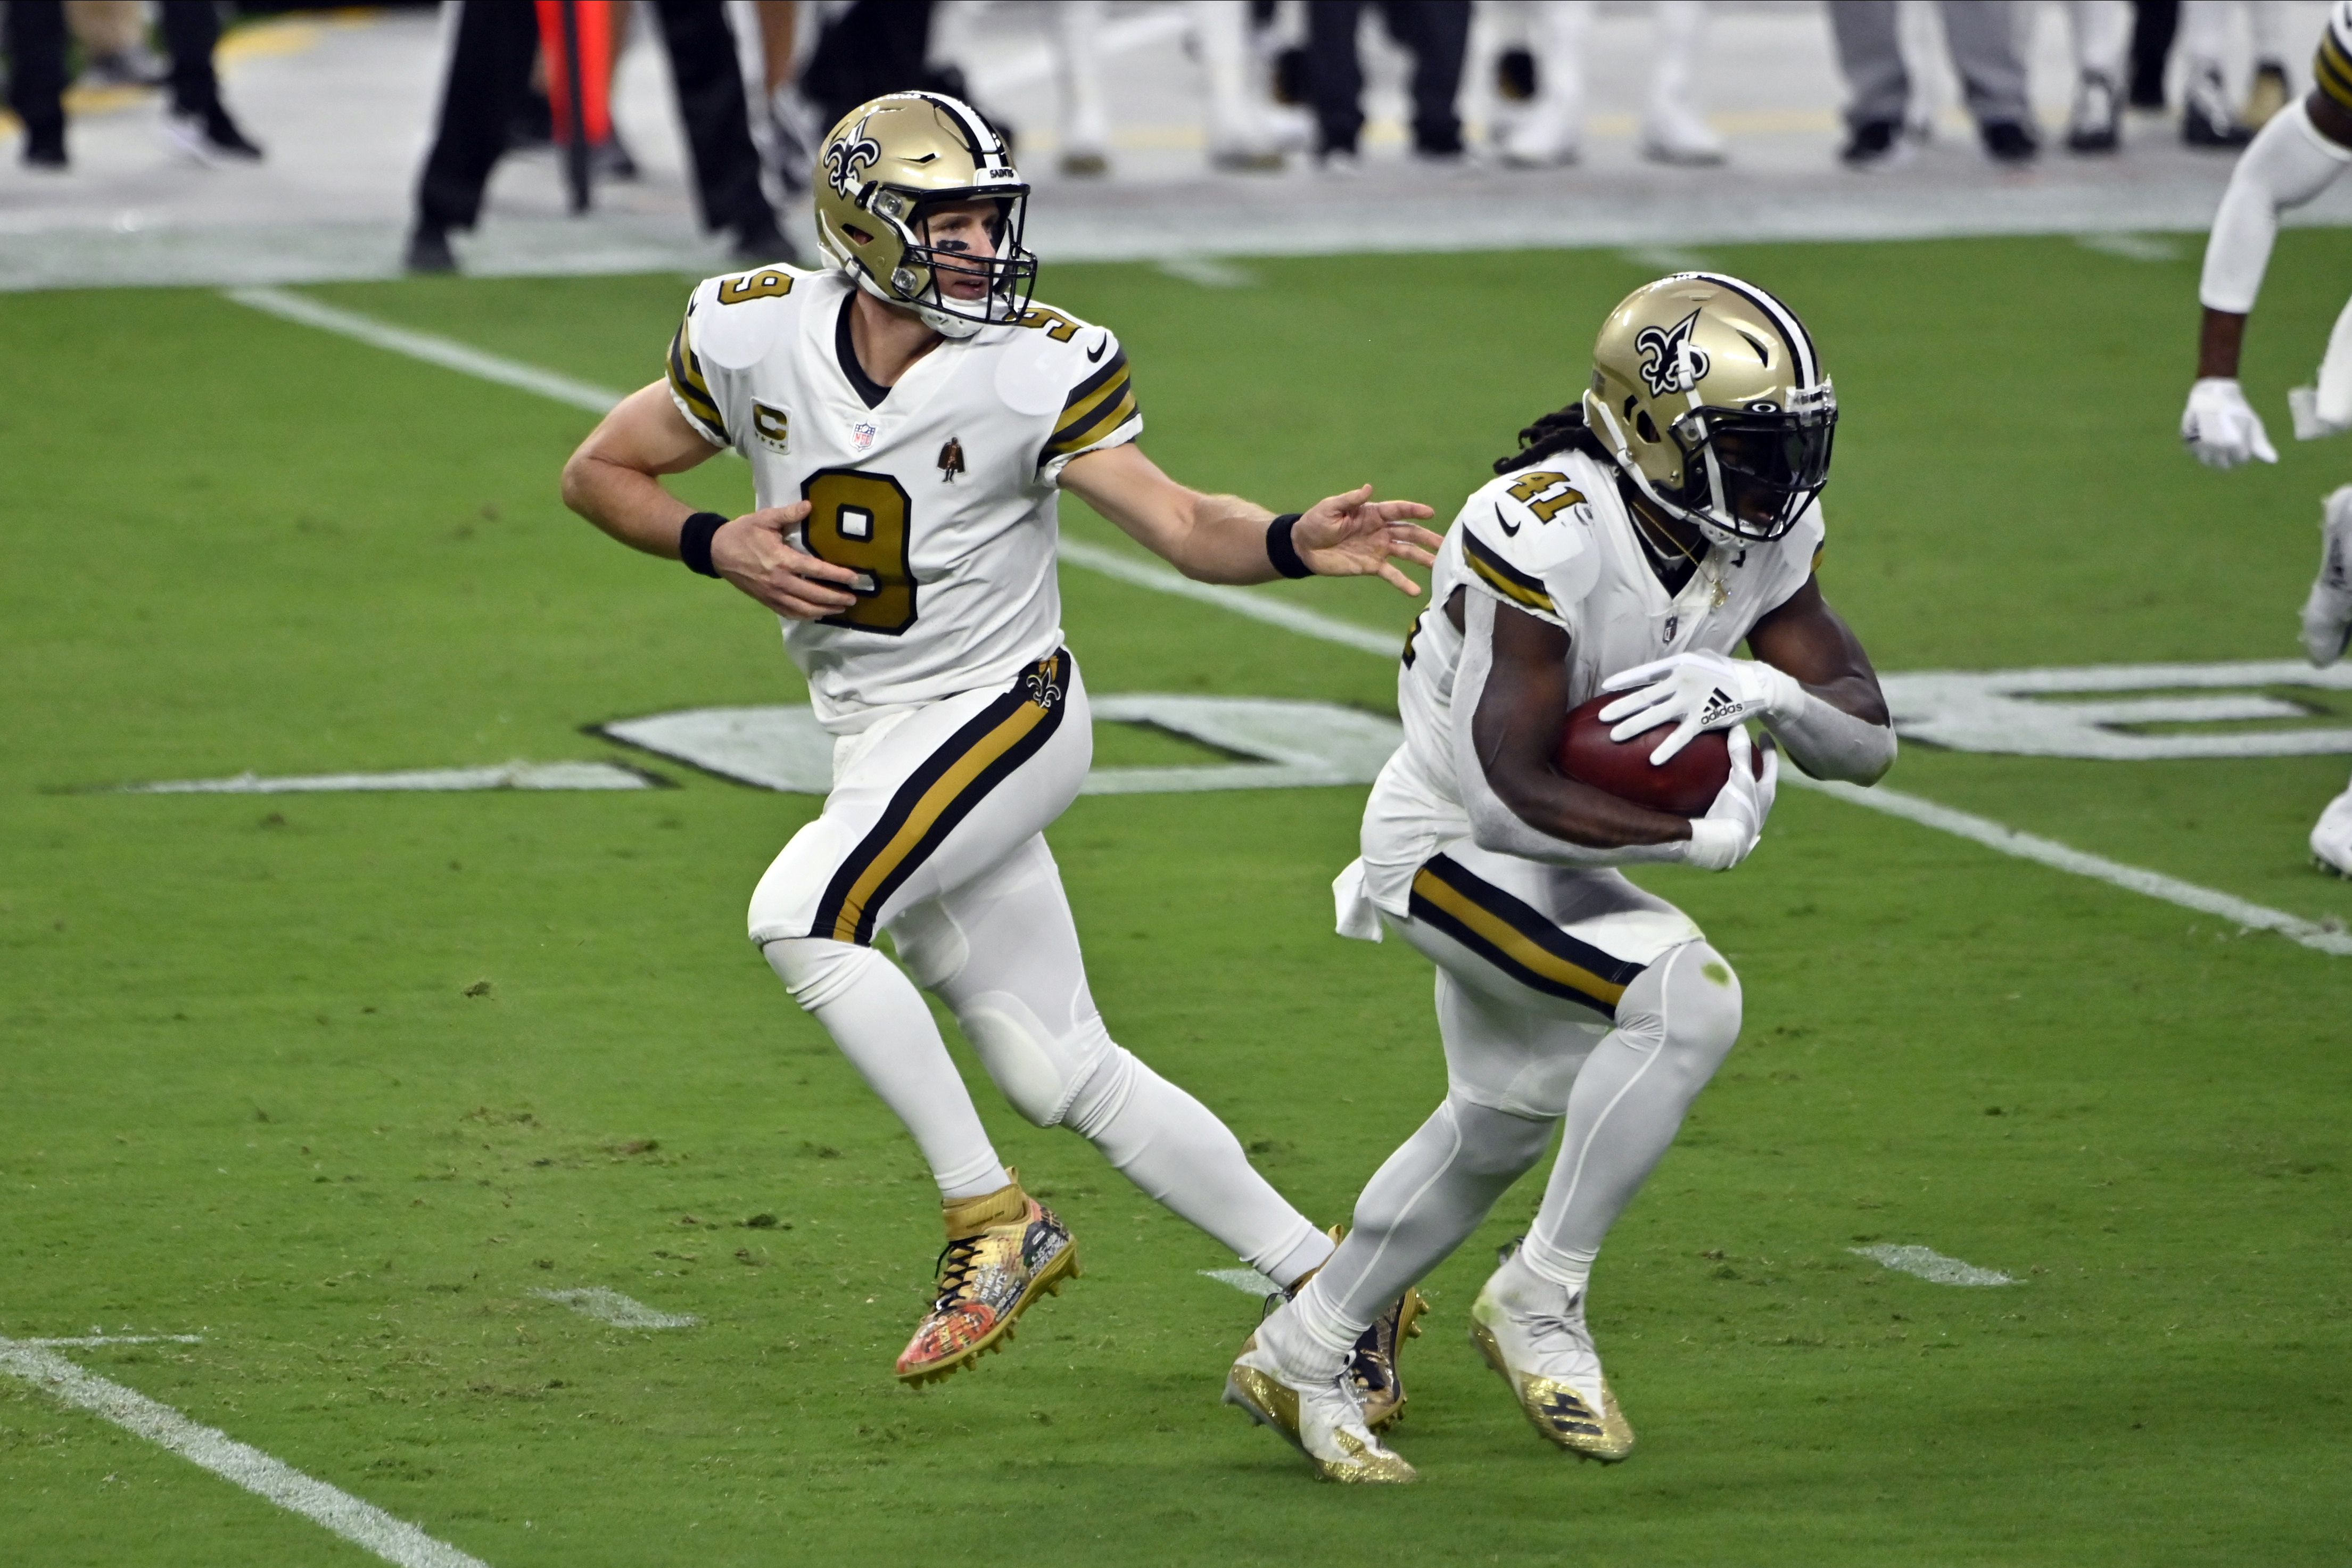 Green Bay Packers vs. New Orleans Saints FREE LIVE STREAM (9/27/20): Watch  Aaron Rodgers vs. Drew Brees on NFL Sunday Night Football, Week 3 online